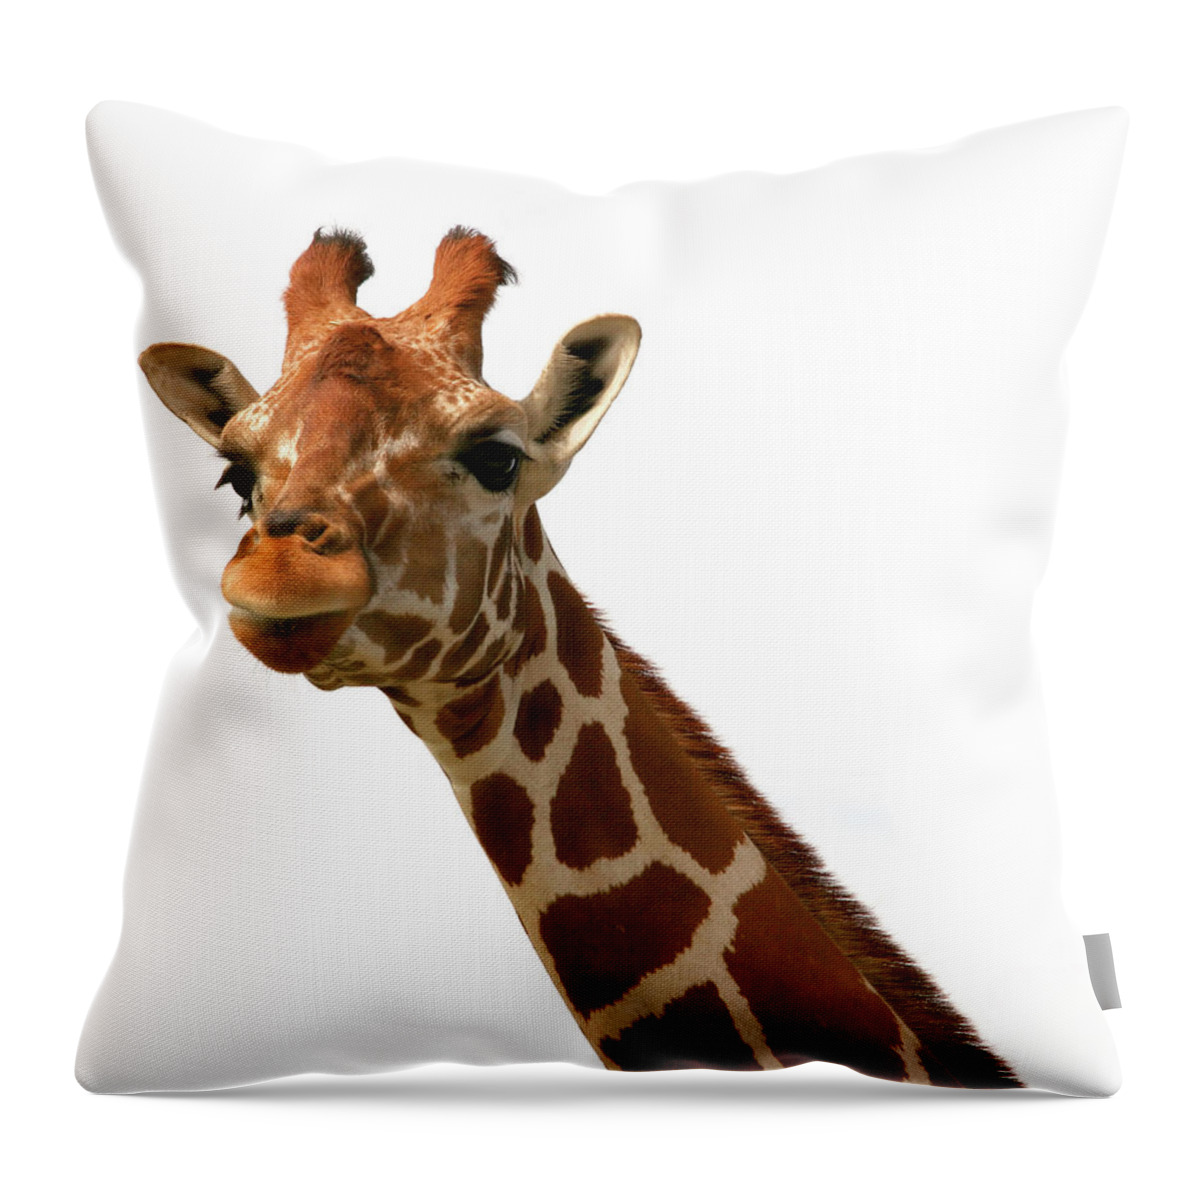 Animal Nose Throw Pillow featuring the photograph Giraffe 1 by Jane